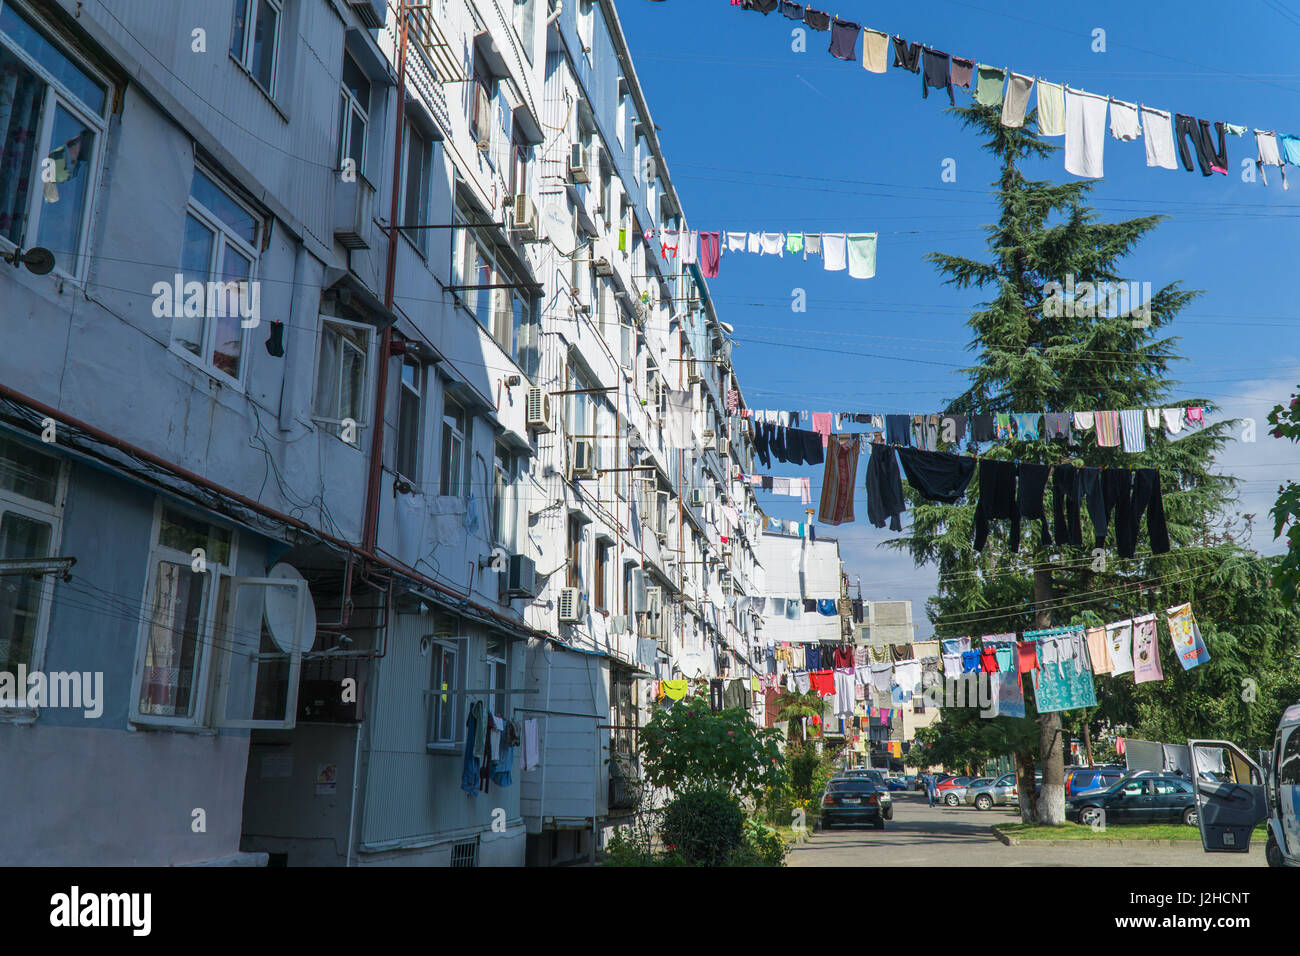 Clothes drying in traditional way on the street of Batumi, Georgia. September Stock Photo